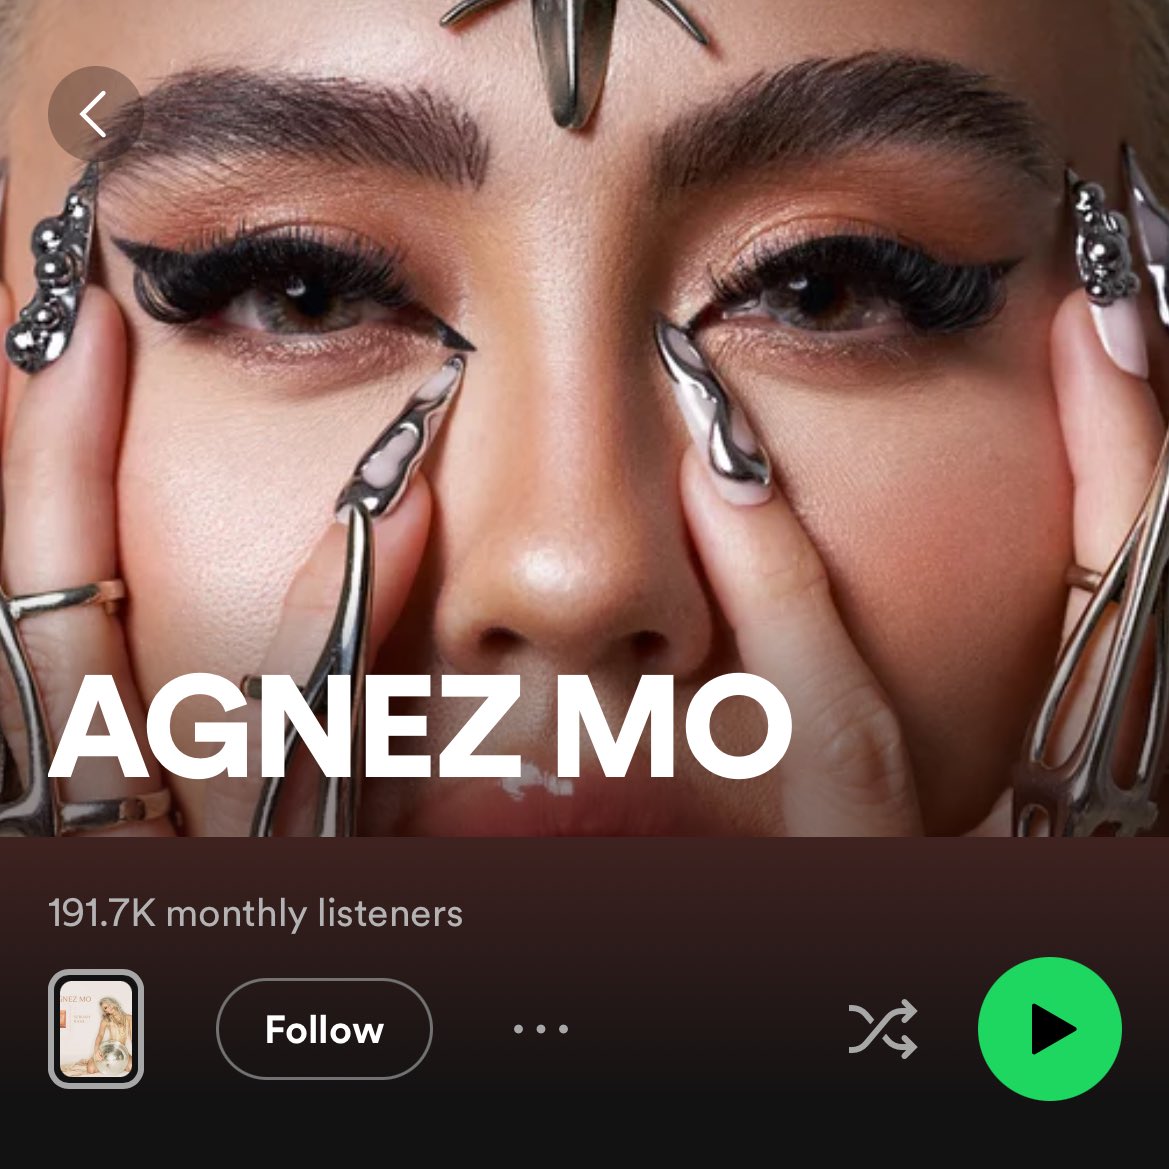 You need to make better music and get a better marketing team, better PR crisis, better label, better everything.

How could you have 17M followers here, 32M on Instagram, yet you only have 191k monthly listeners with unlikeable fanbase?